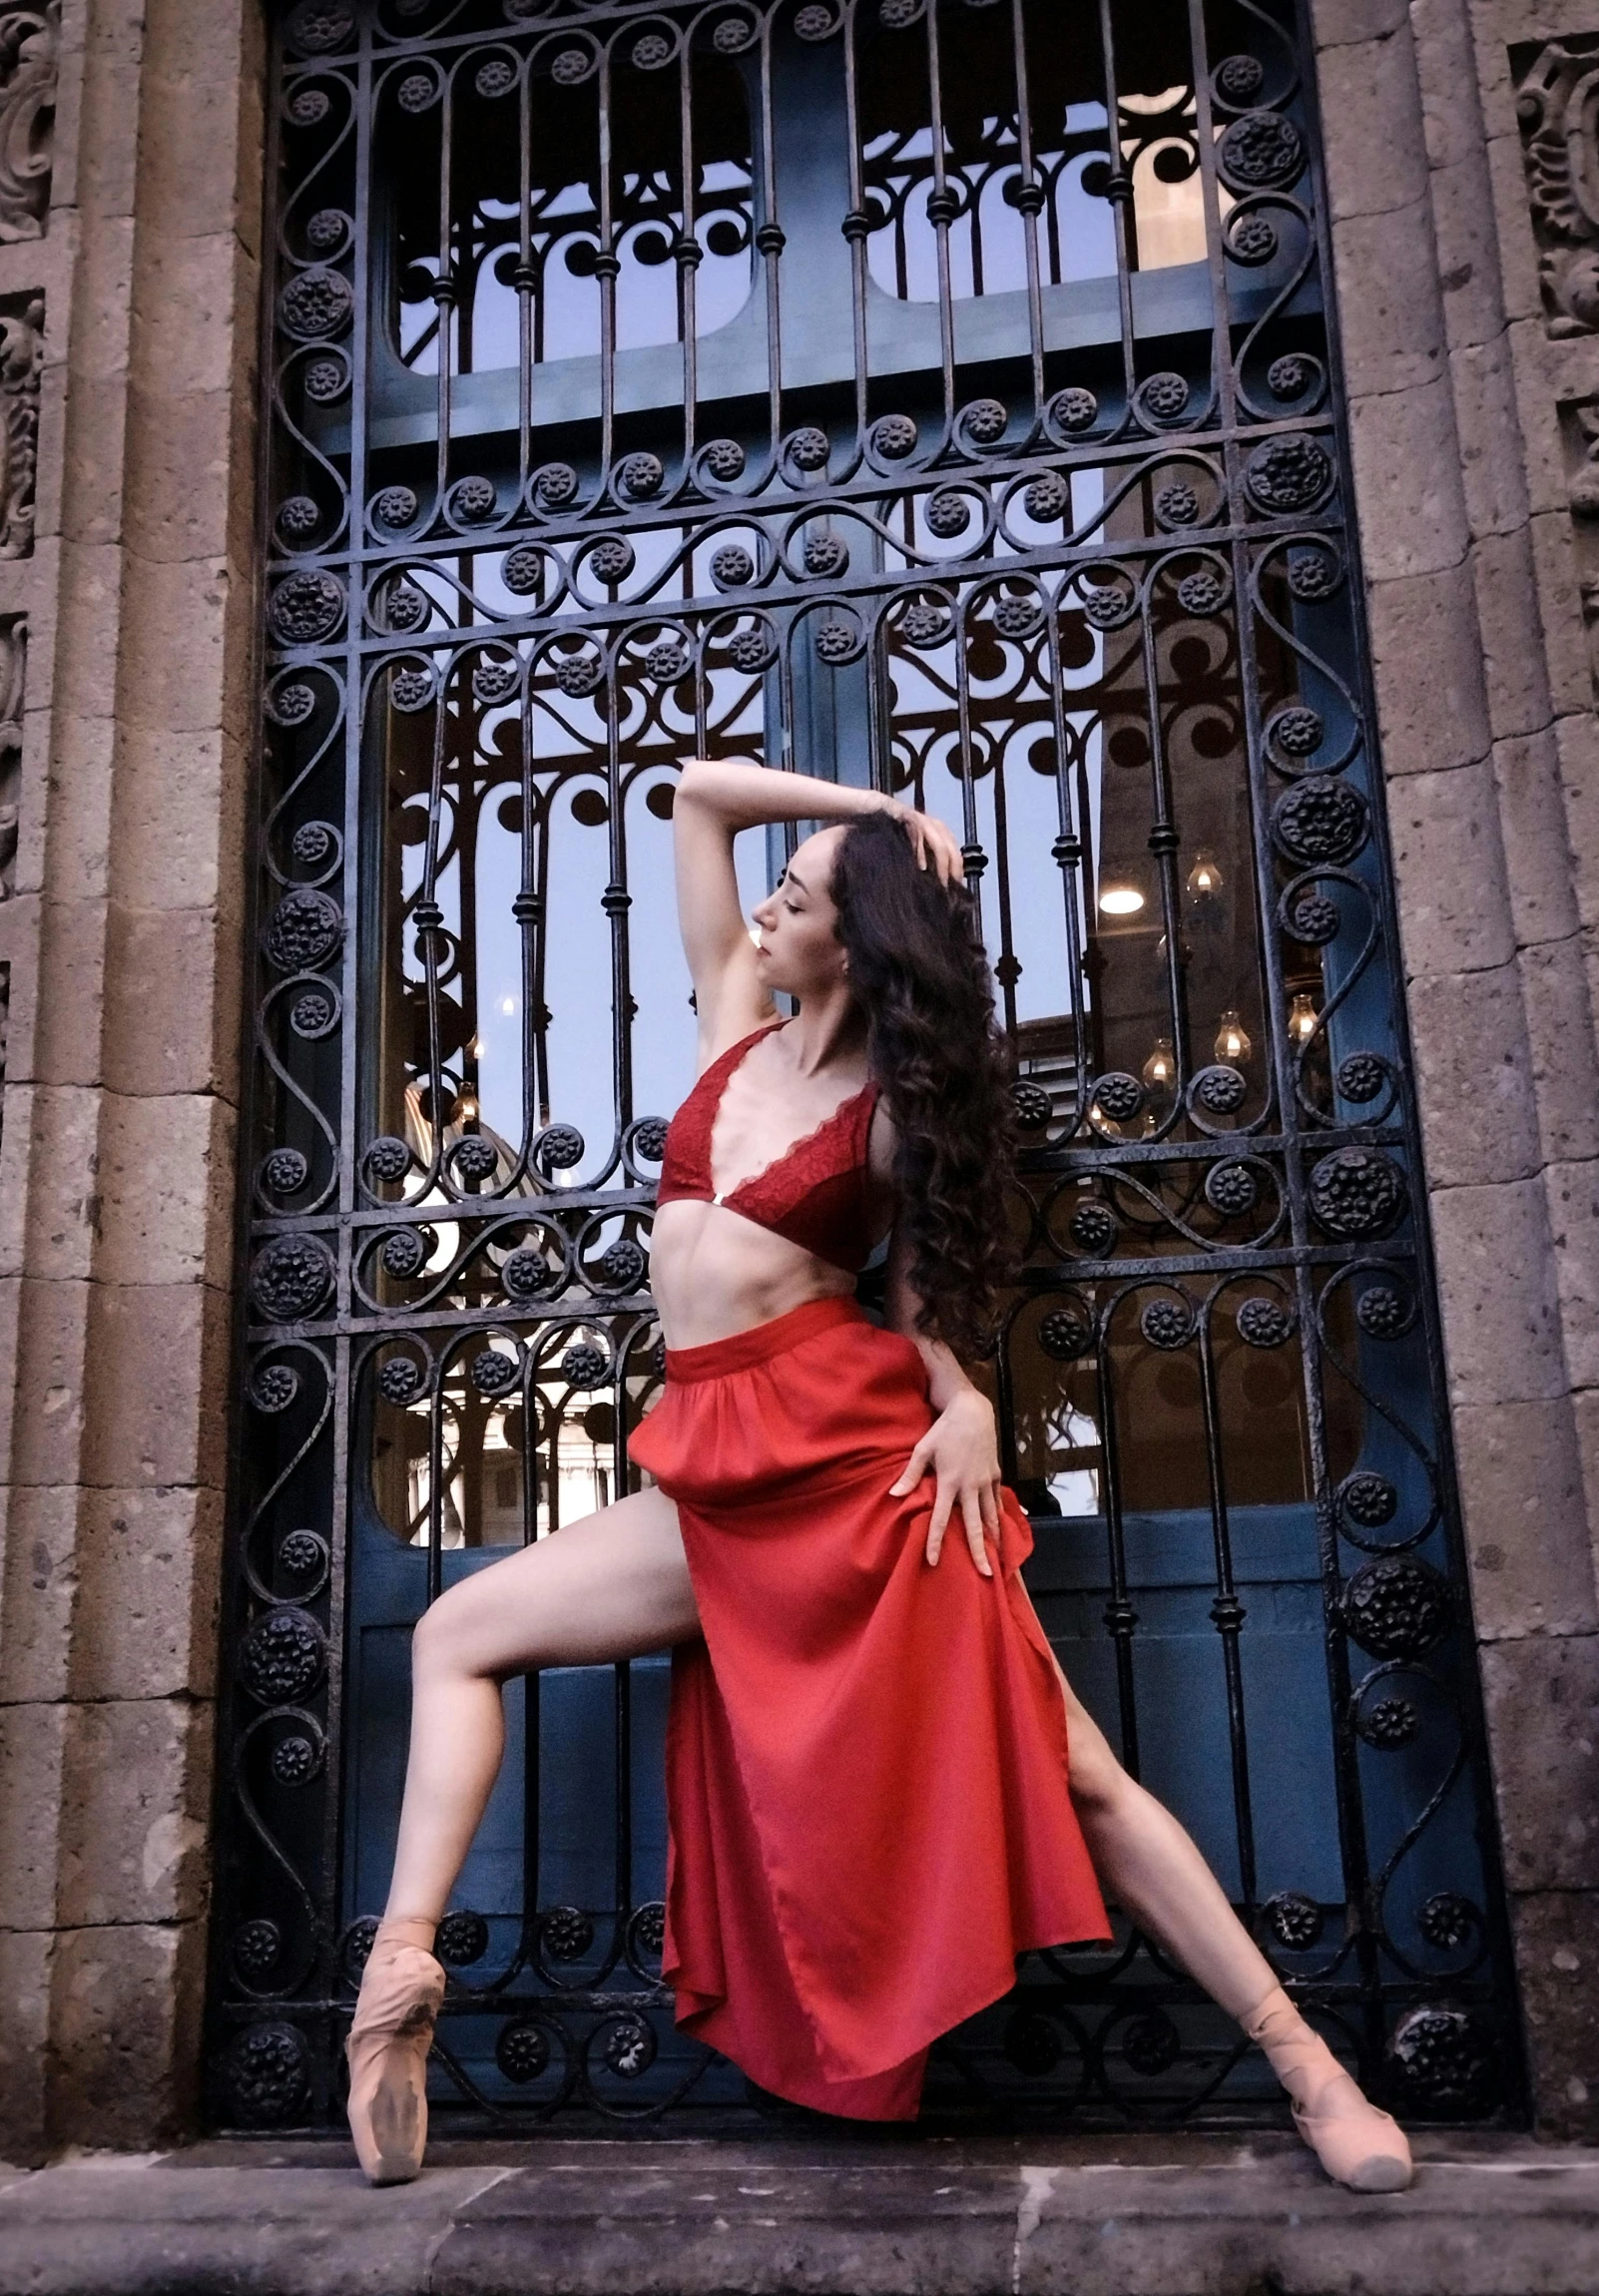 a woman in a red dress and high heels posing by an iron gate